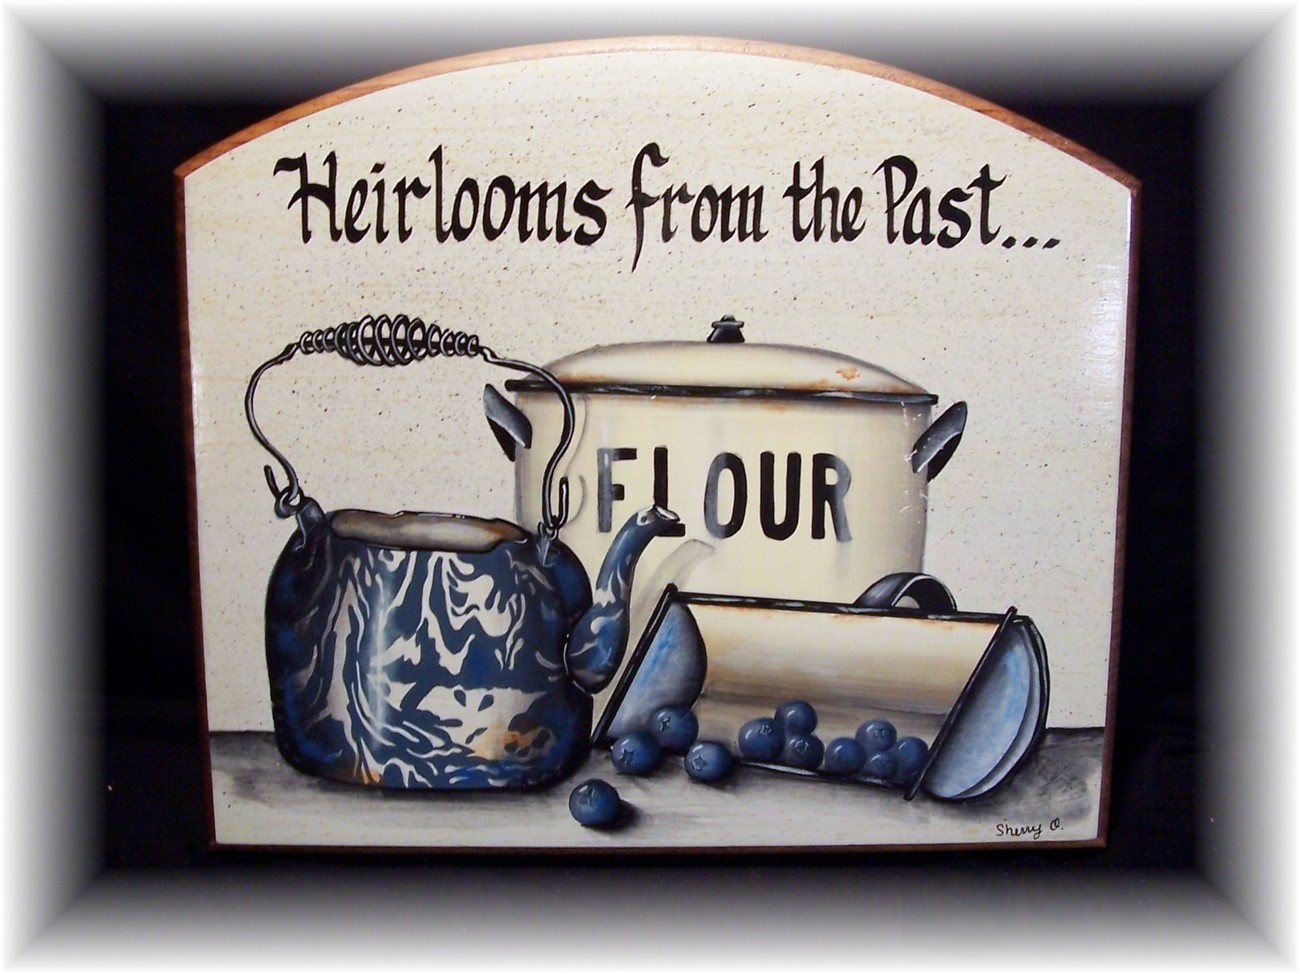 Vintage Country "Heirlooms From The Past" Wall Plaque - $12.95